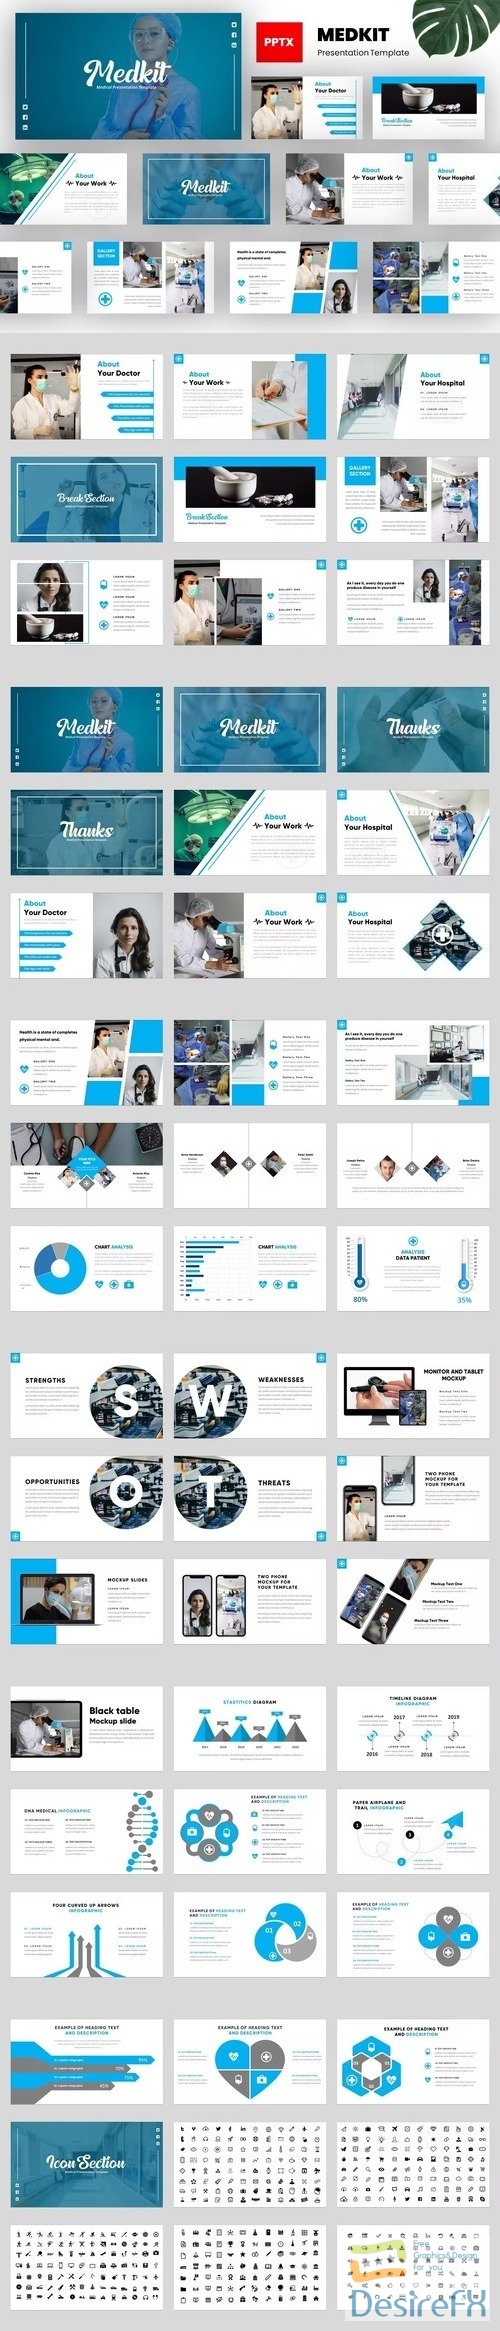 Medkit - Medical Treatment Powerpoint Template